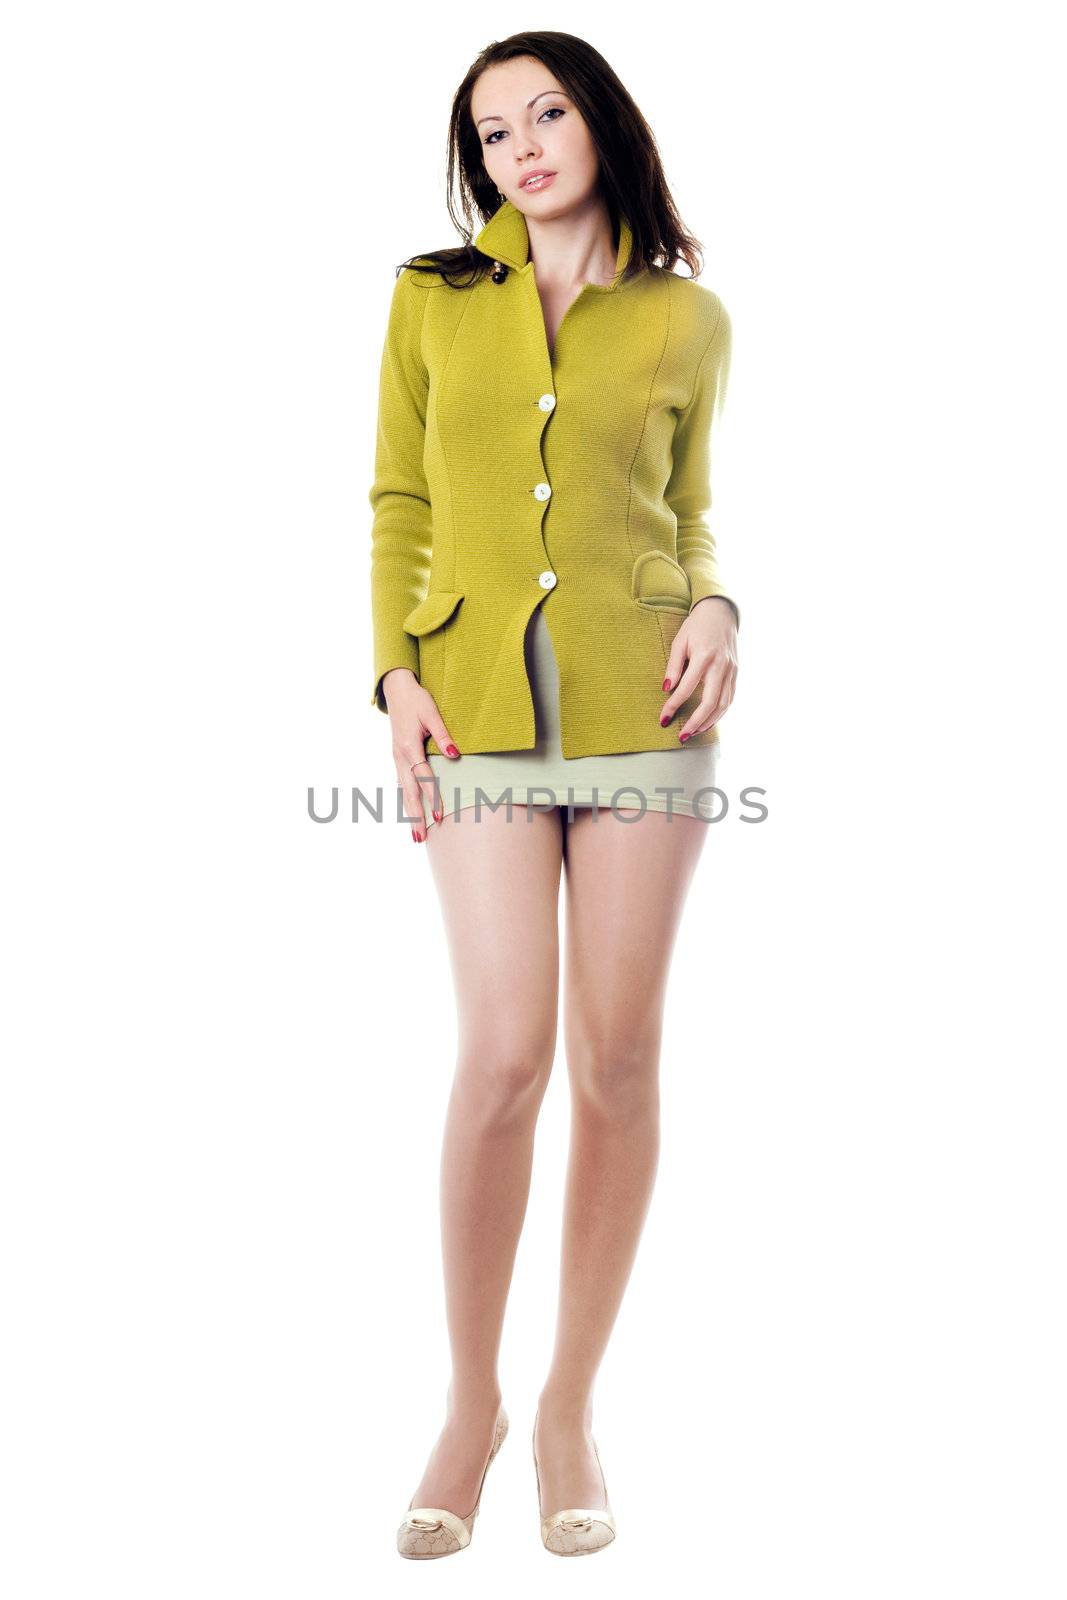 Young pretty woman in yellow knitted jacket. Isolated